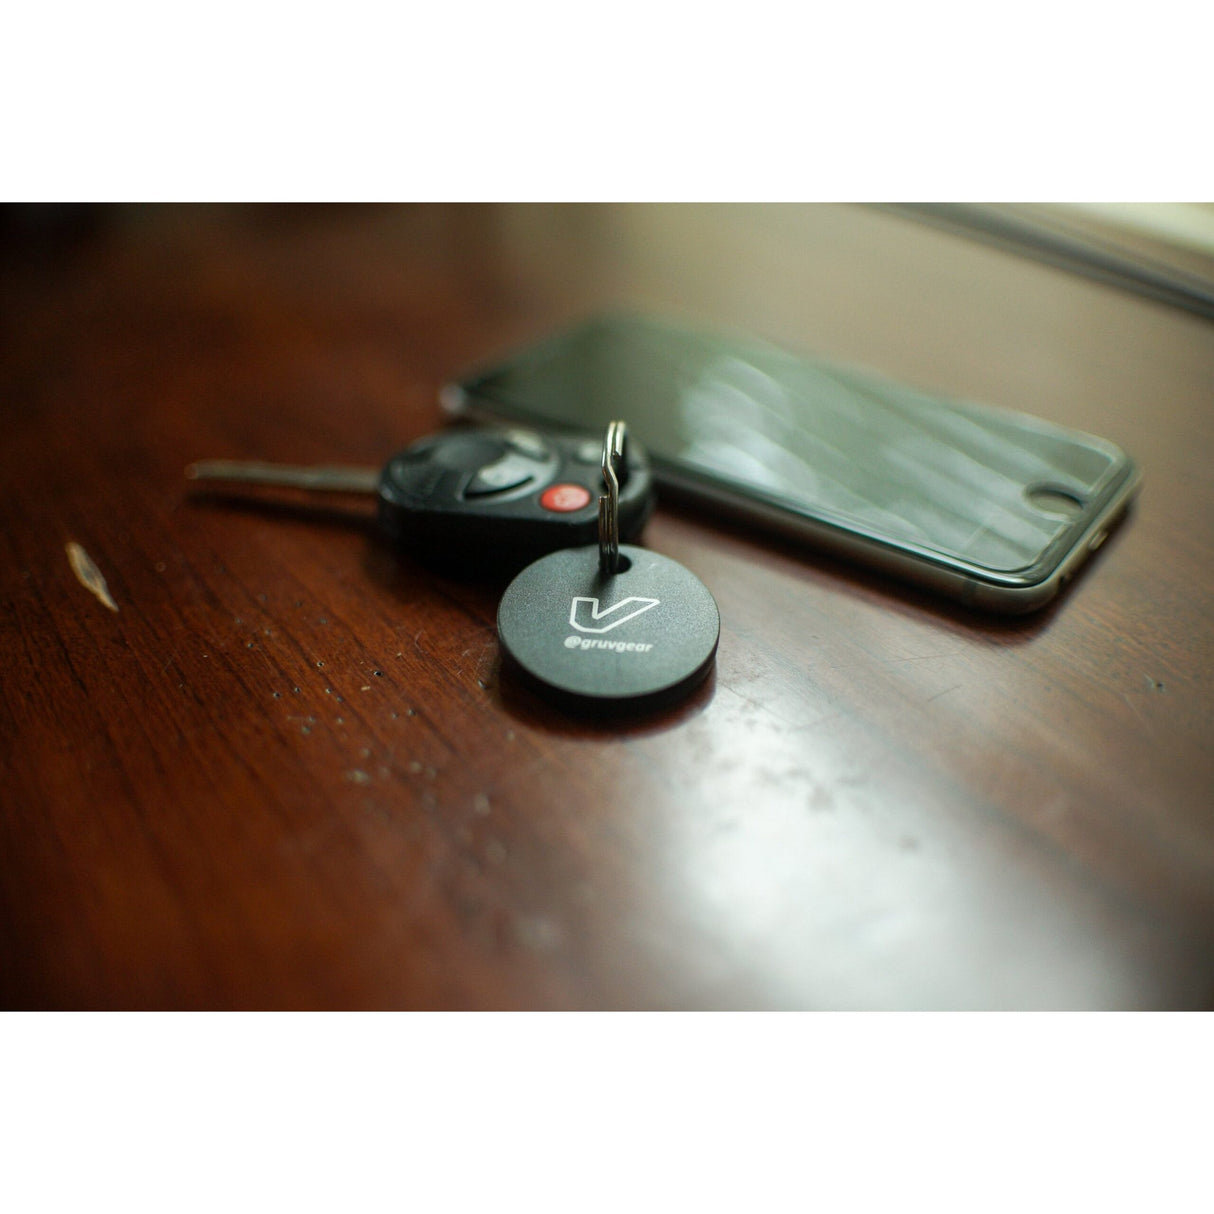 Gruv Gear Bluetooth Tracker for Gruv Gear Bags and Gears